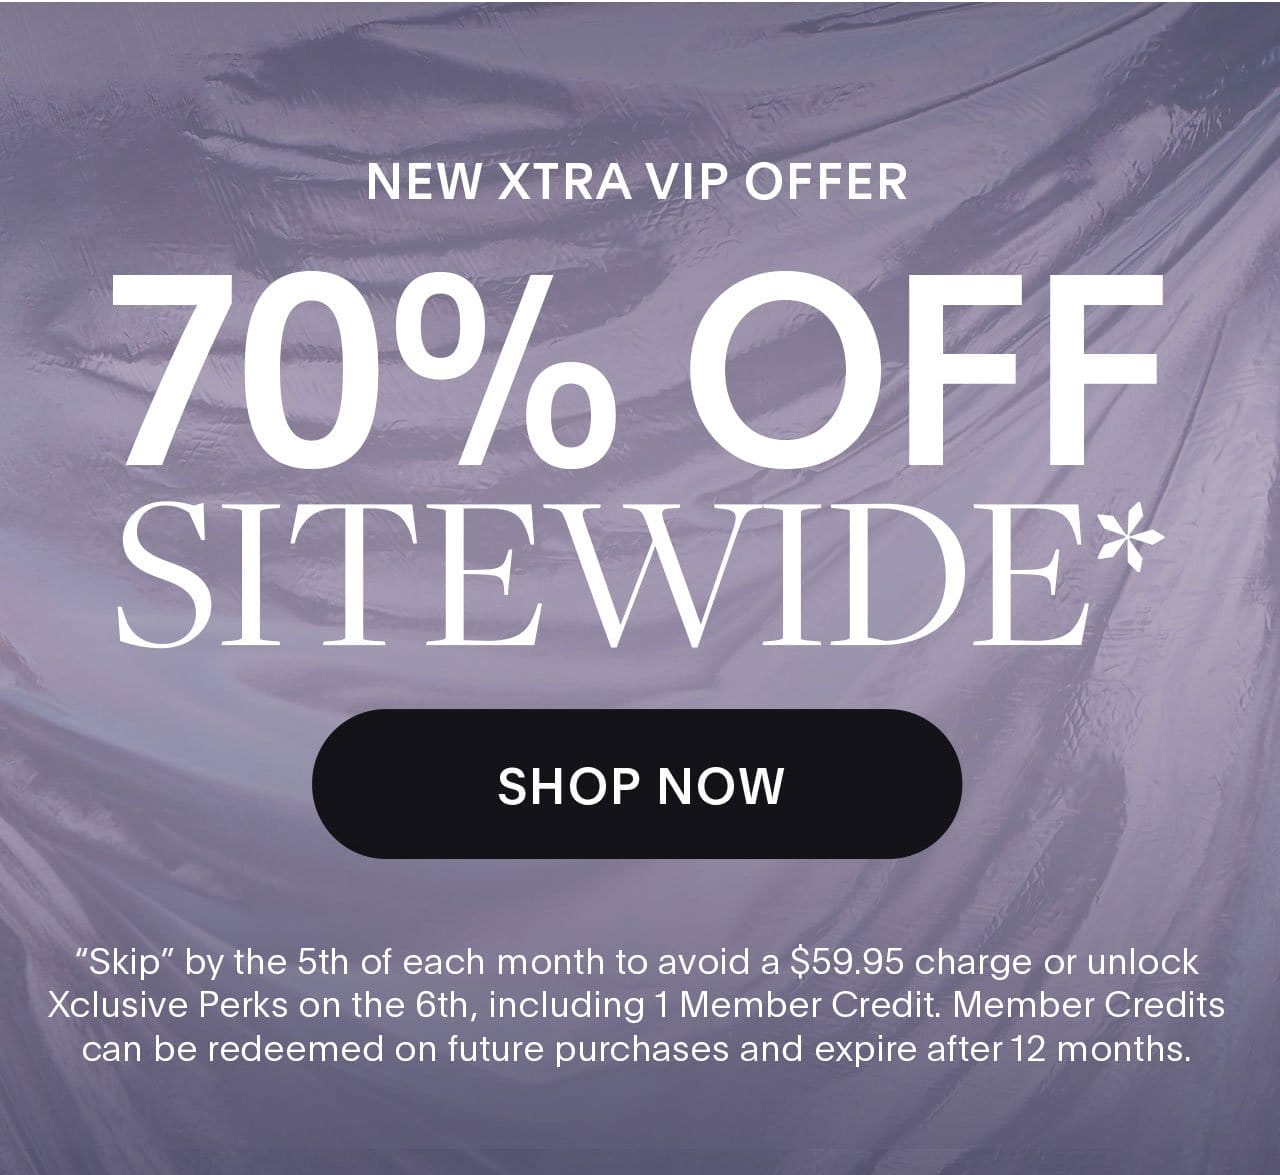 70% off sitewide